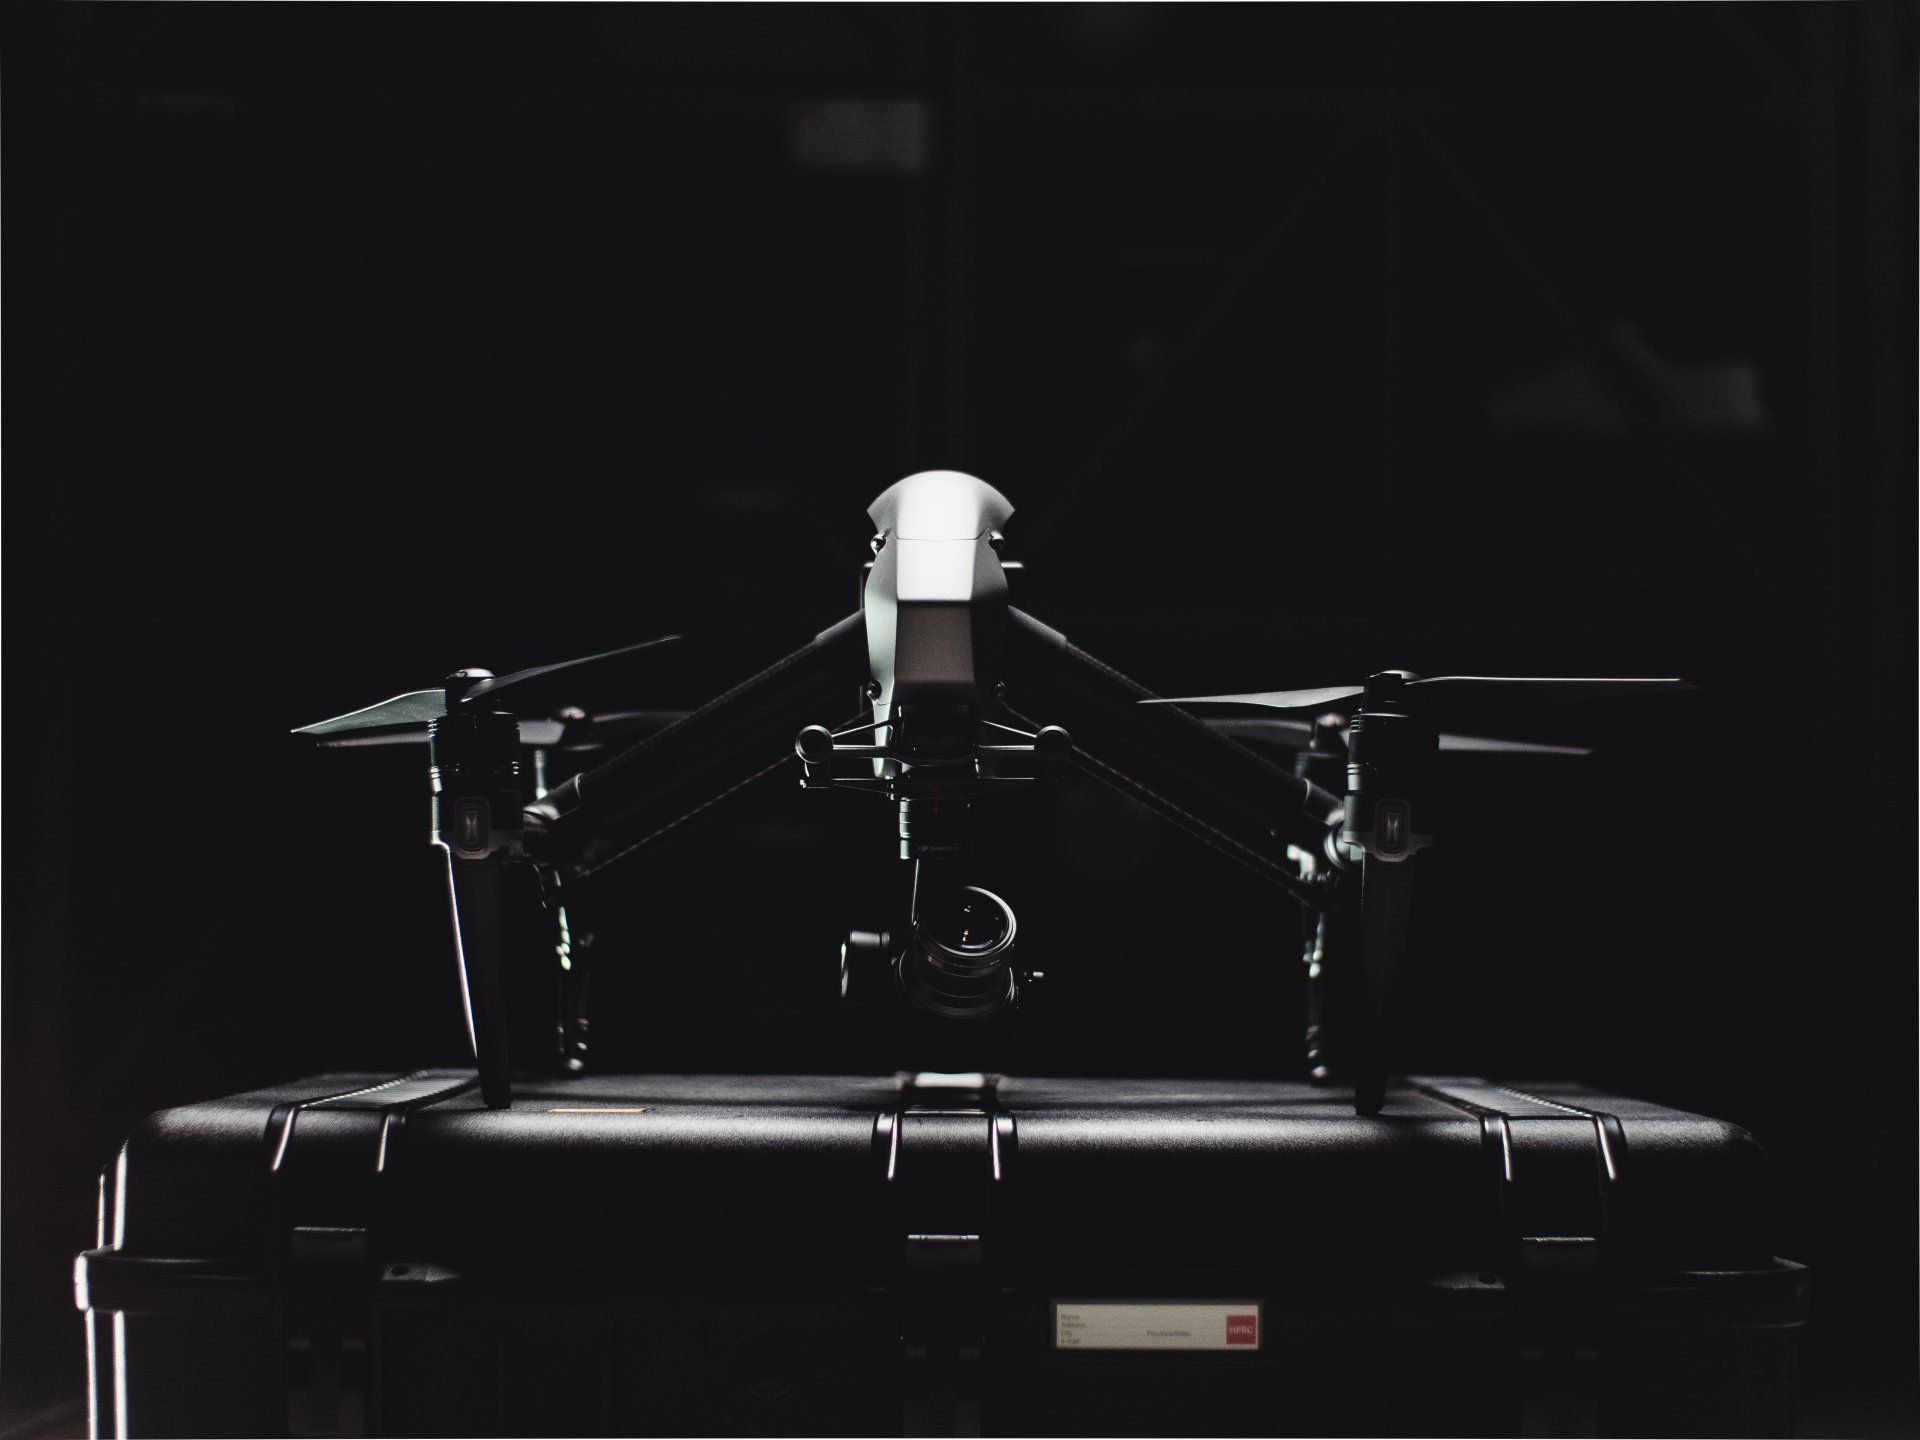 A drone is sitting on top of a black case in the dark.